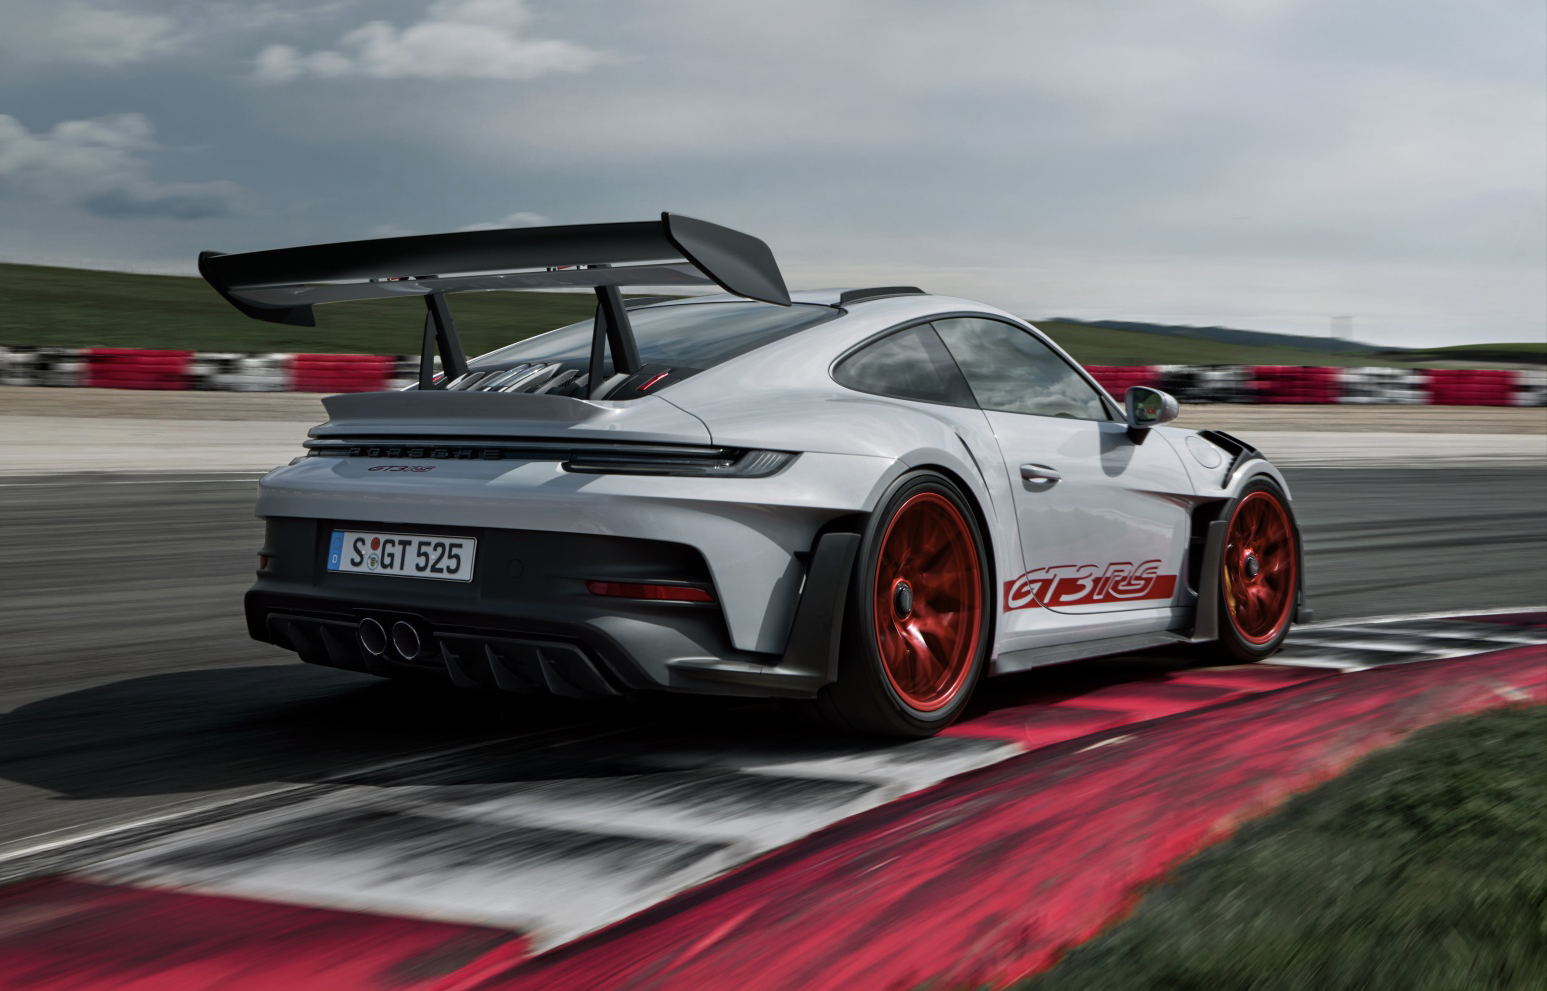 Side view of Porsche 911 GT3 RS racing on track